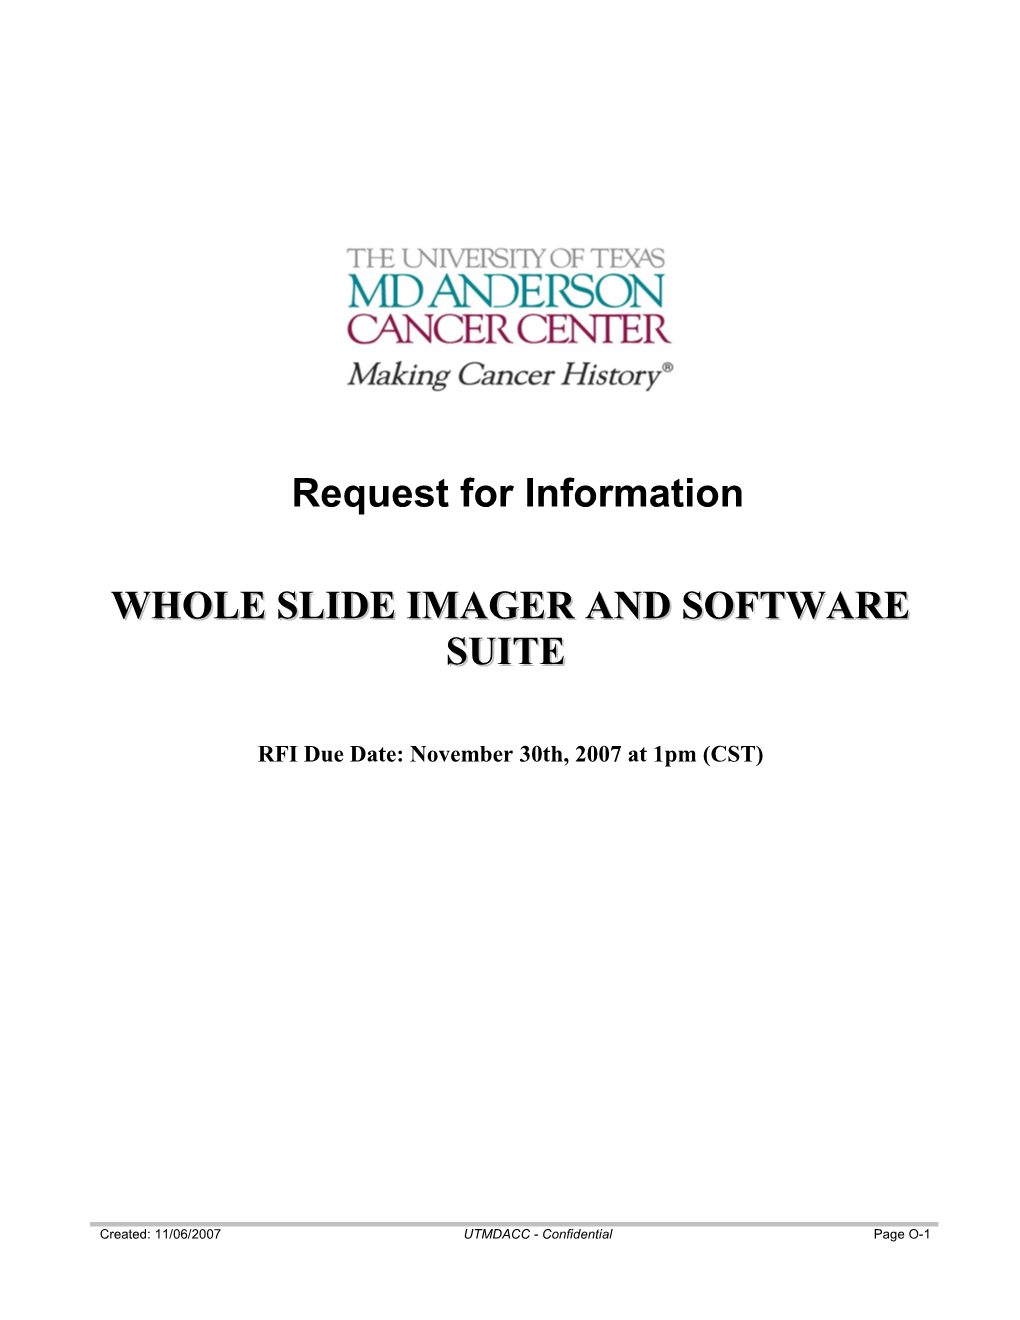 Whole Slide Imager and Software Suite